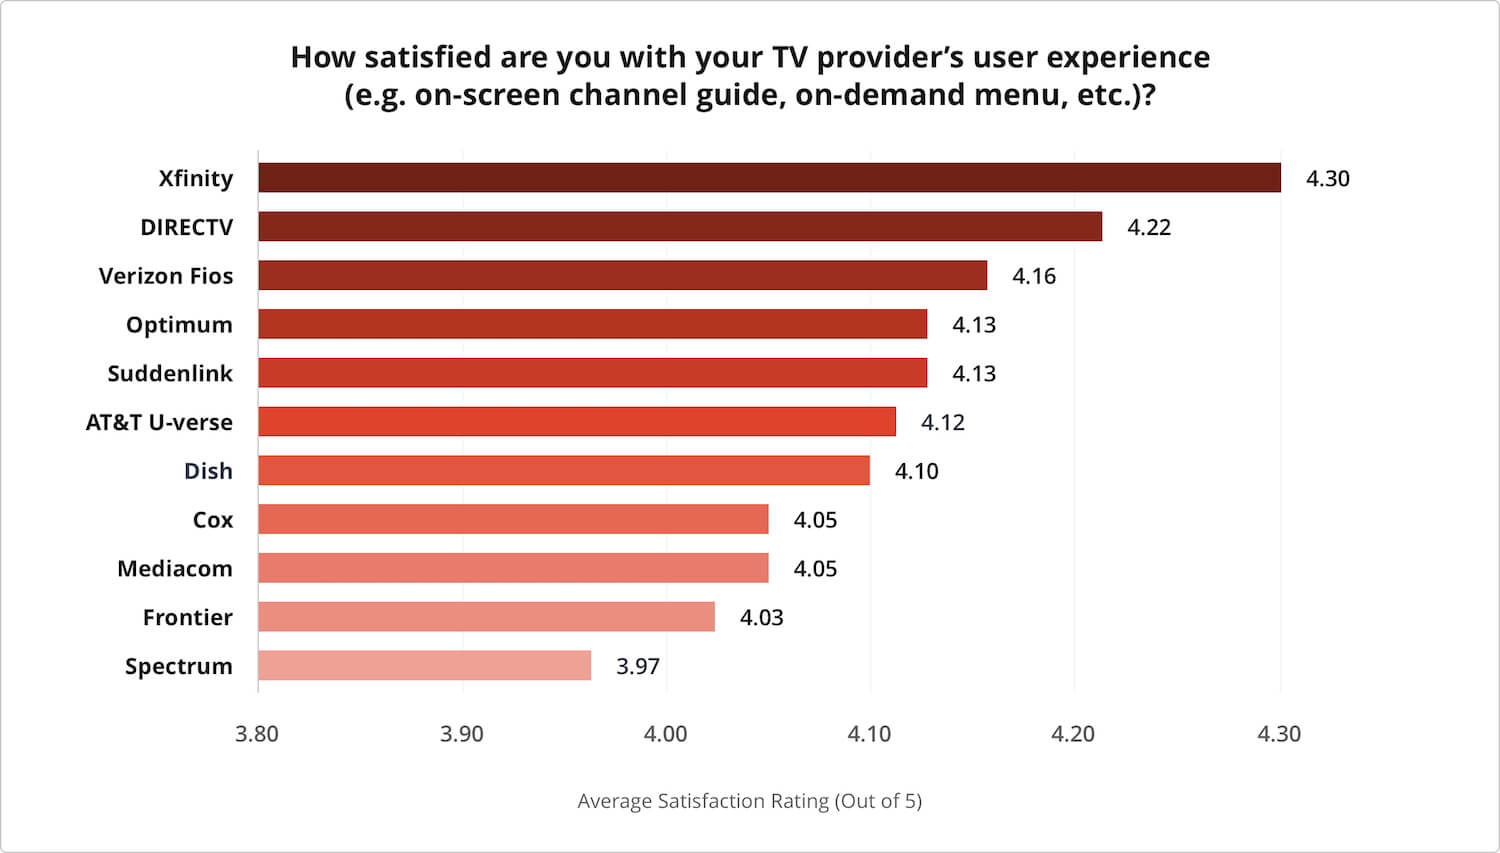 Satisfaction survey results on TV Provider's User Experience